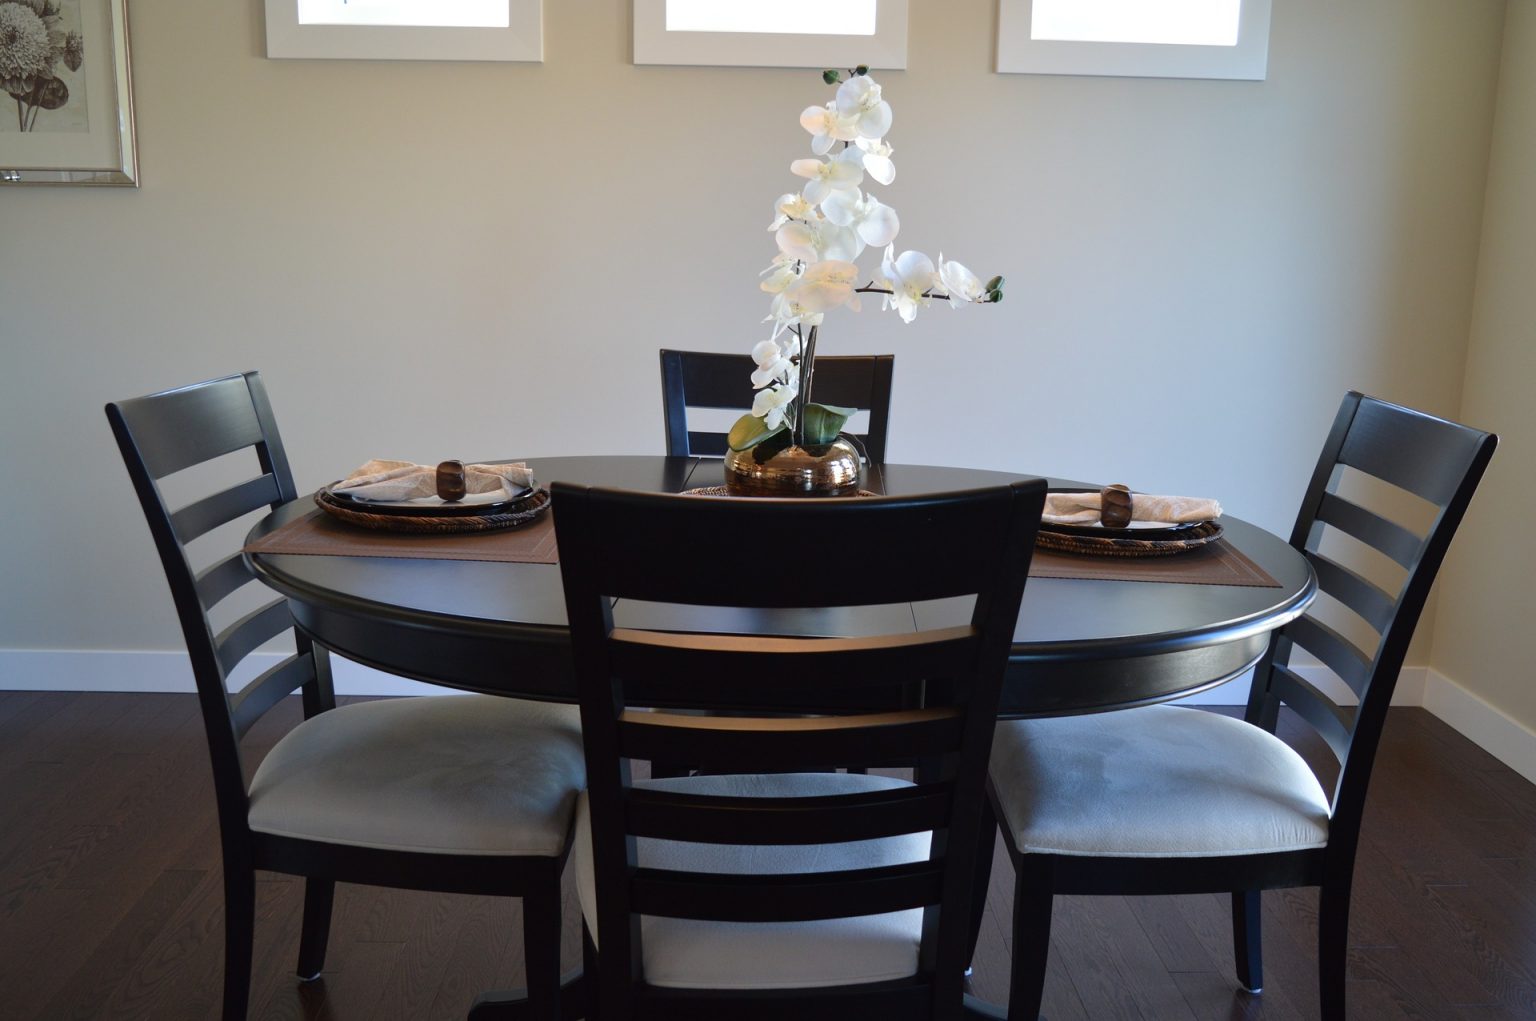 How to Reupholster Dining Room Chairs -- In 2 Easy Methods